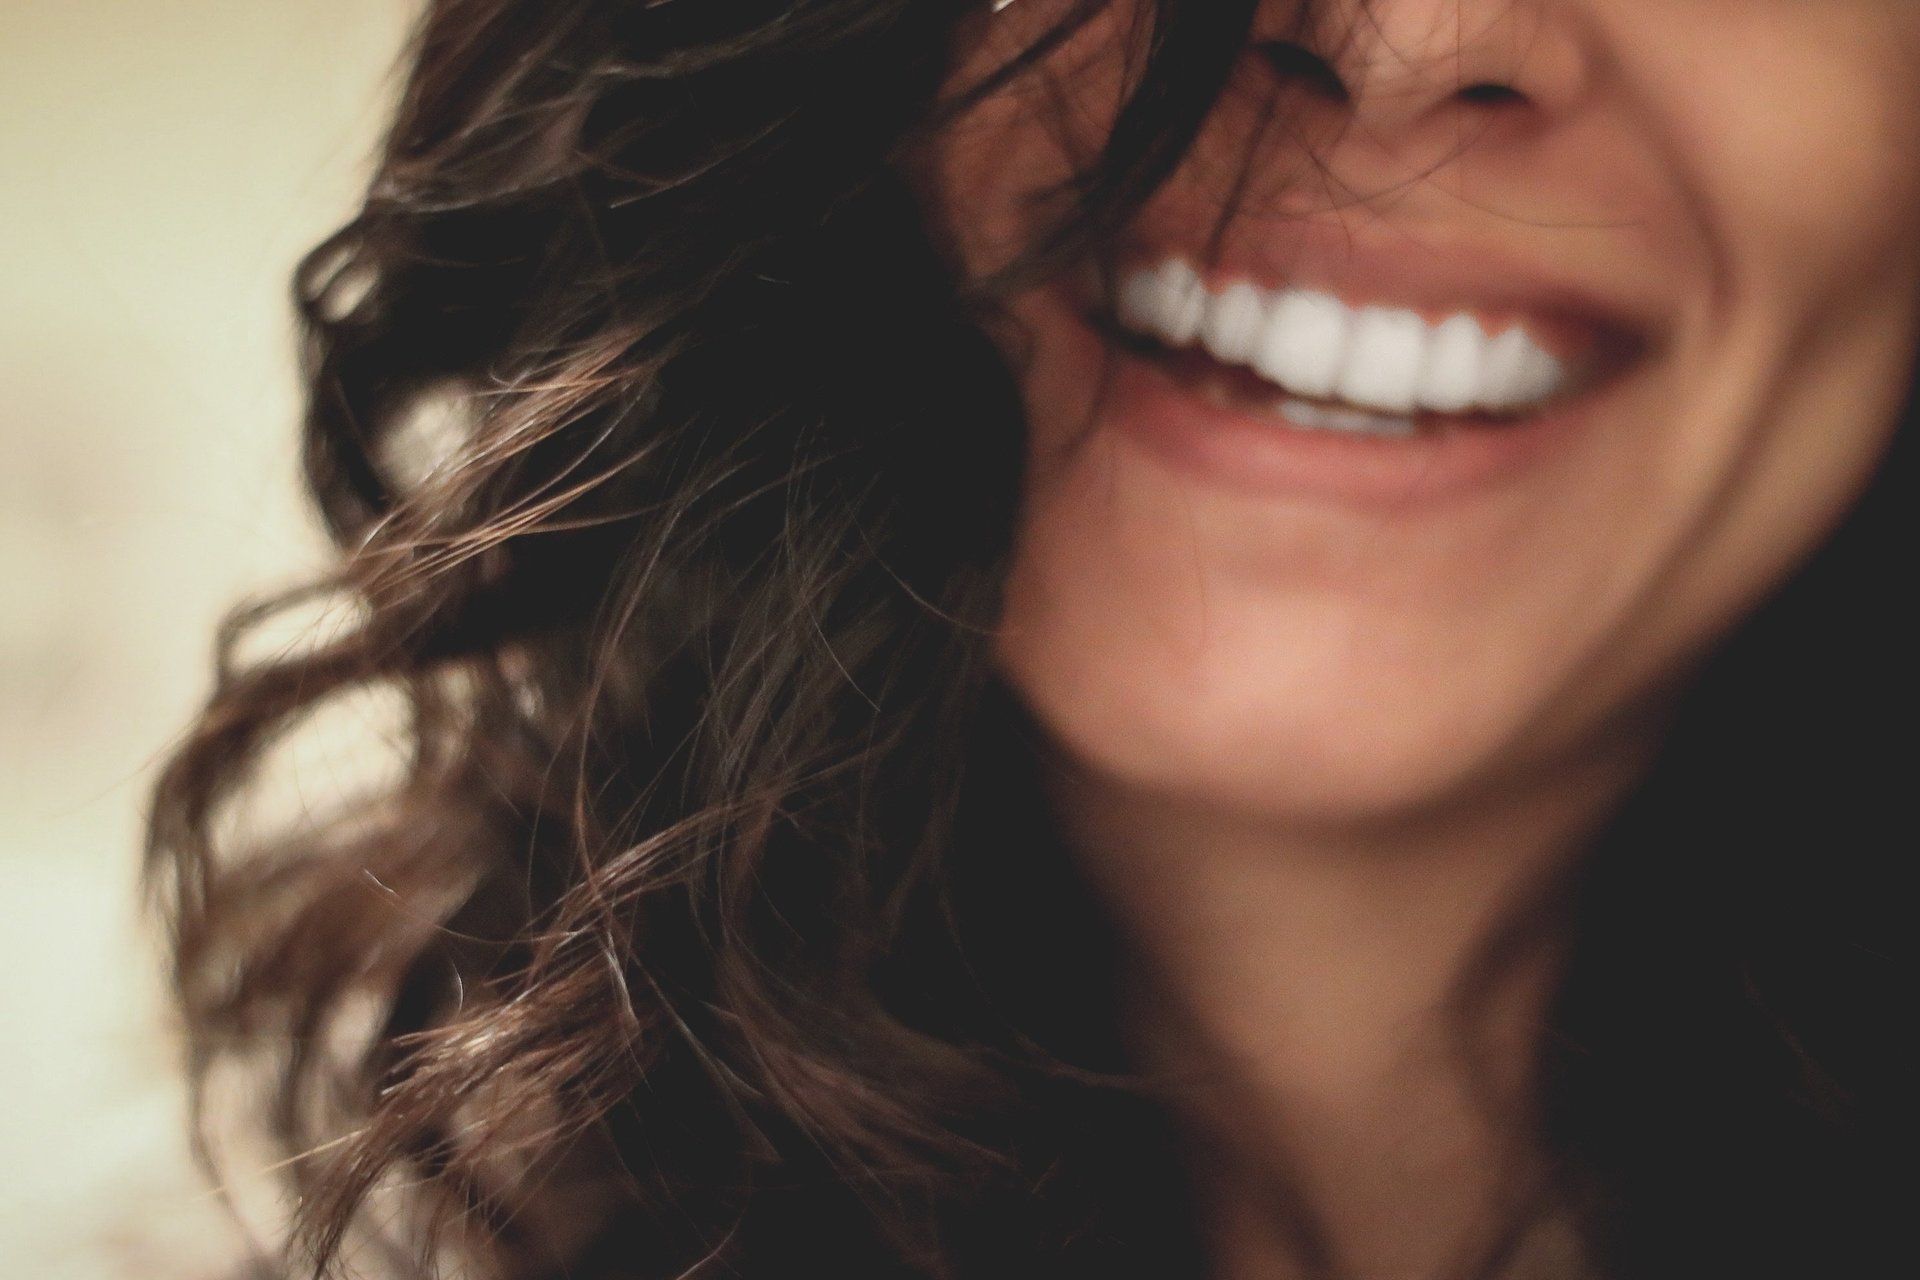 a close up of a woman 's face smiling with her hair blowing in the wind .